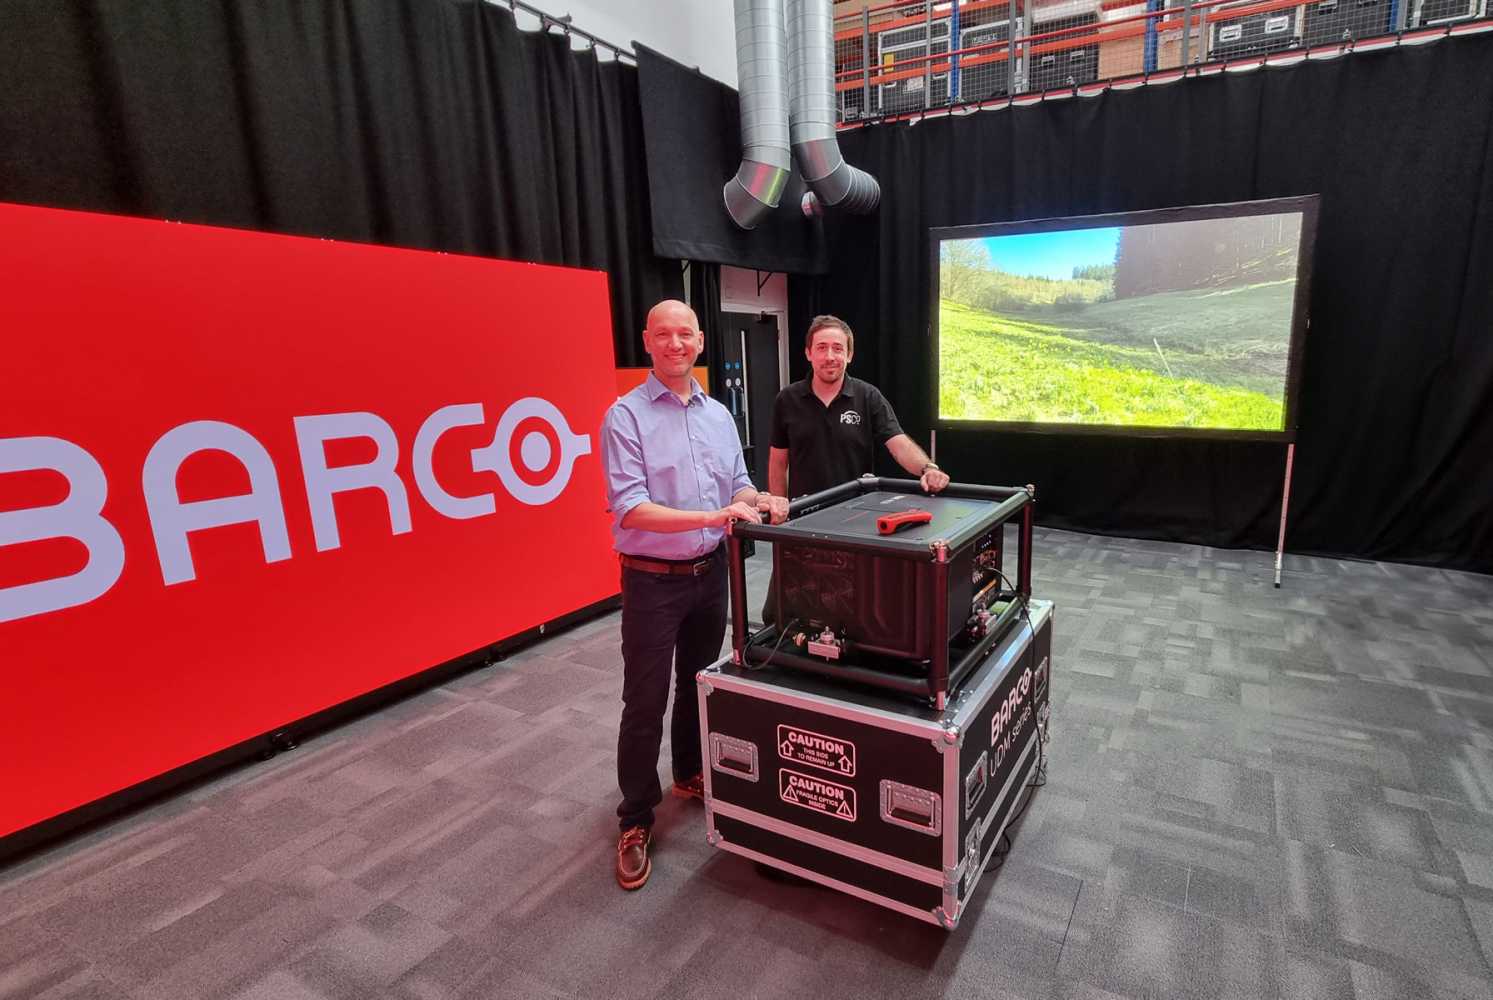 Tom Allott, asset manager at PSCo and Ashley Raines, country manager UK & Ireland at Barco